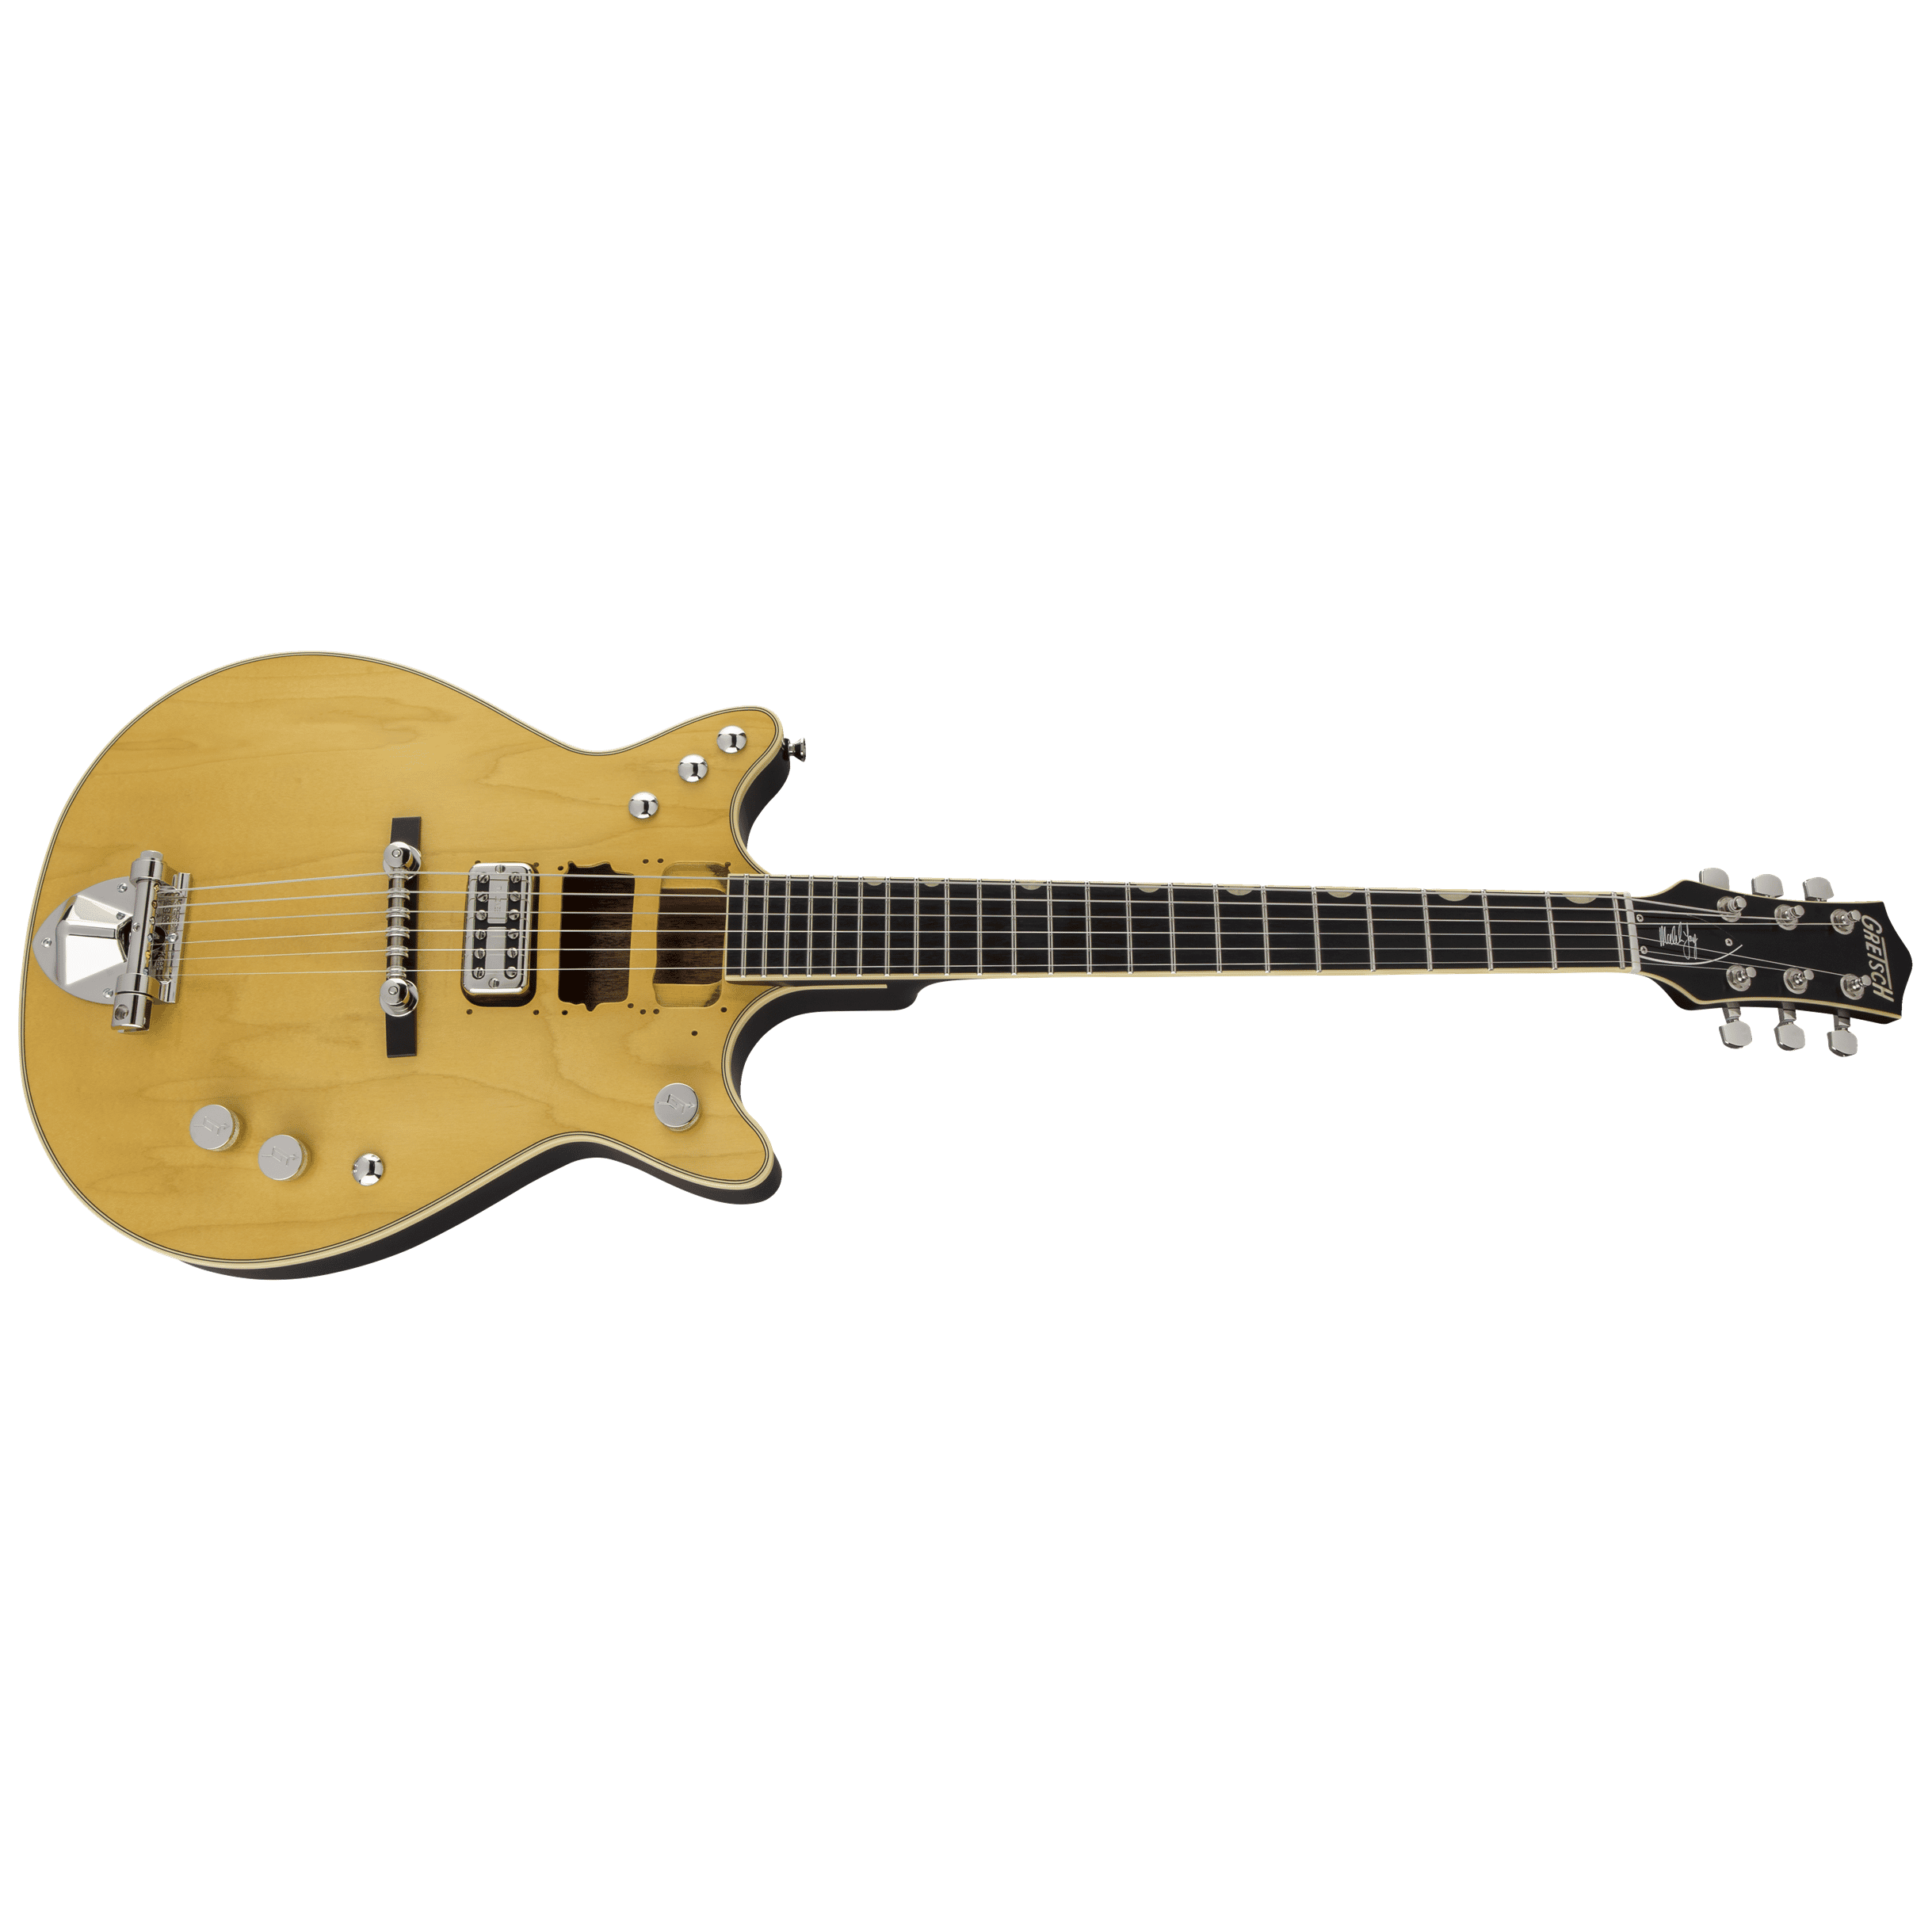 Gretsch G6131-MY Malcolm Young Signature Jet EB NAT 4